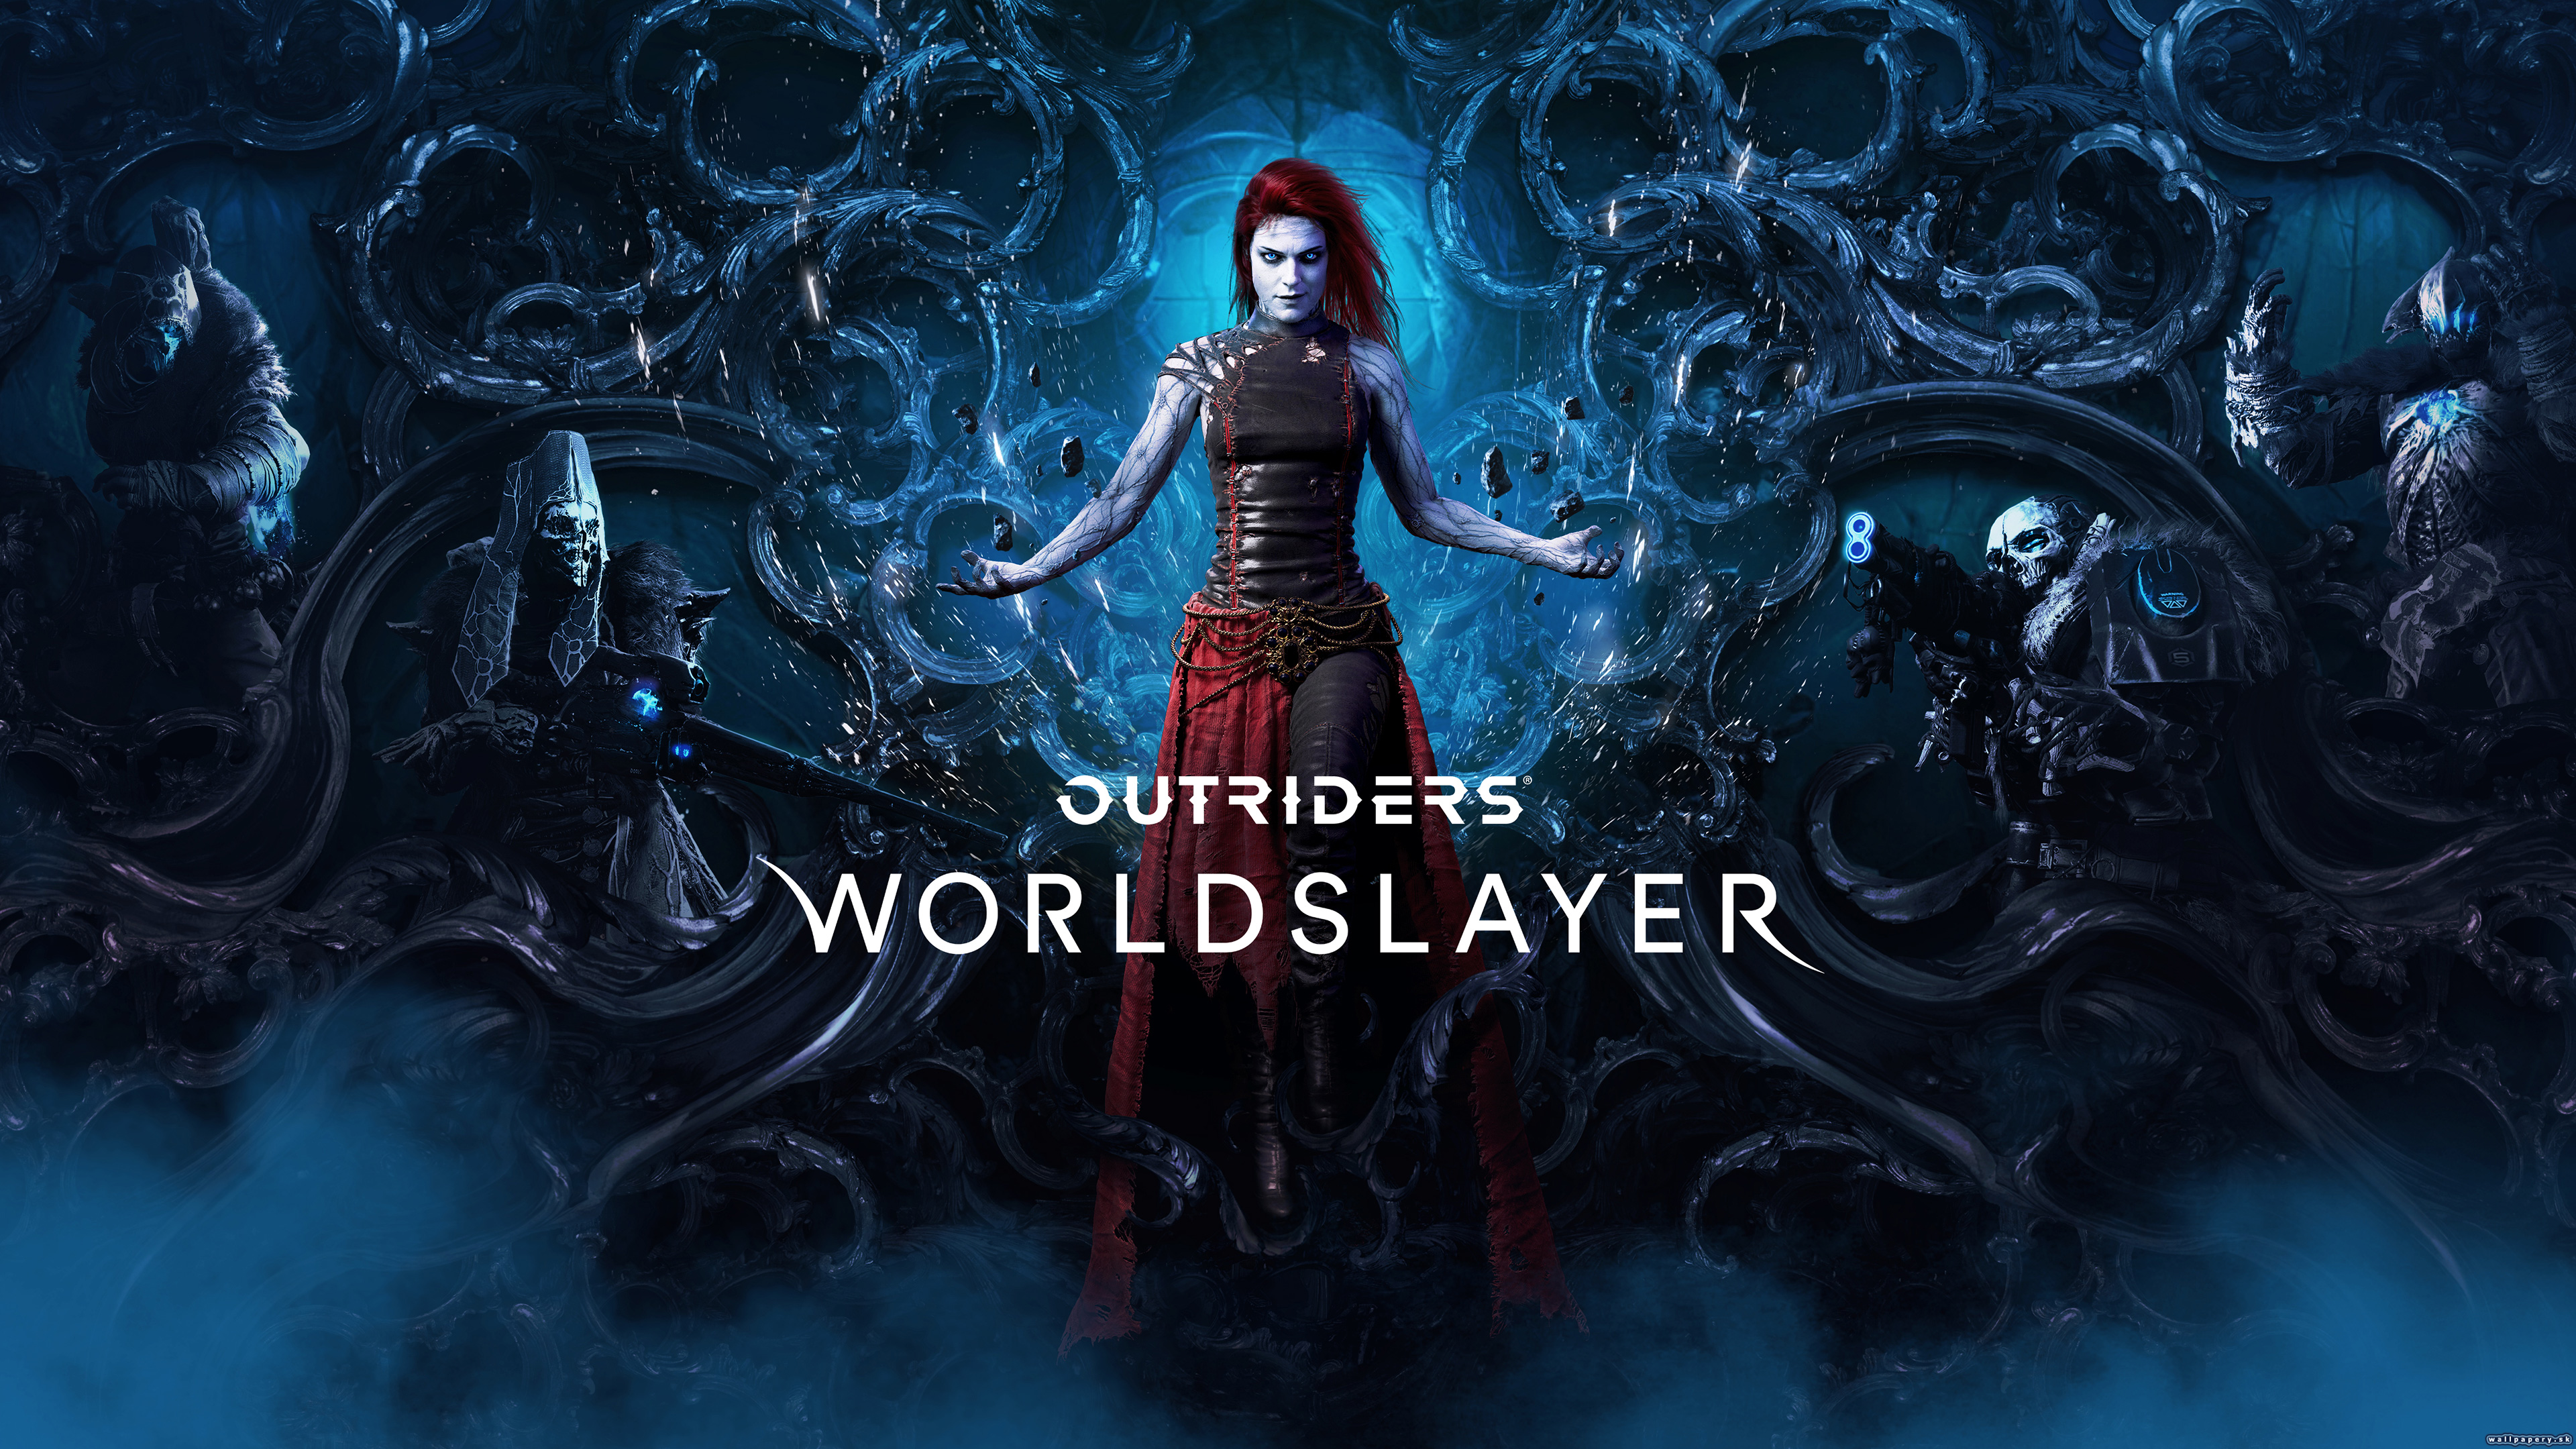 Outriders Worldslayer - wallpaper 1